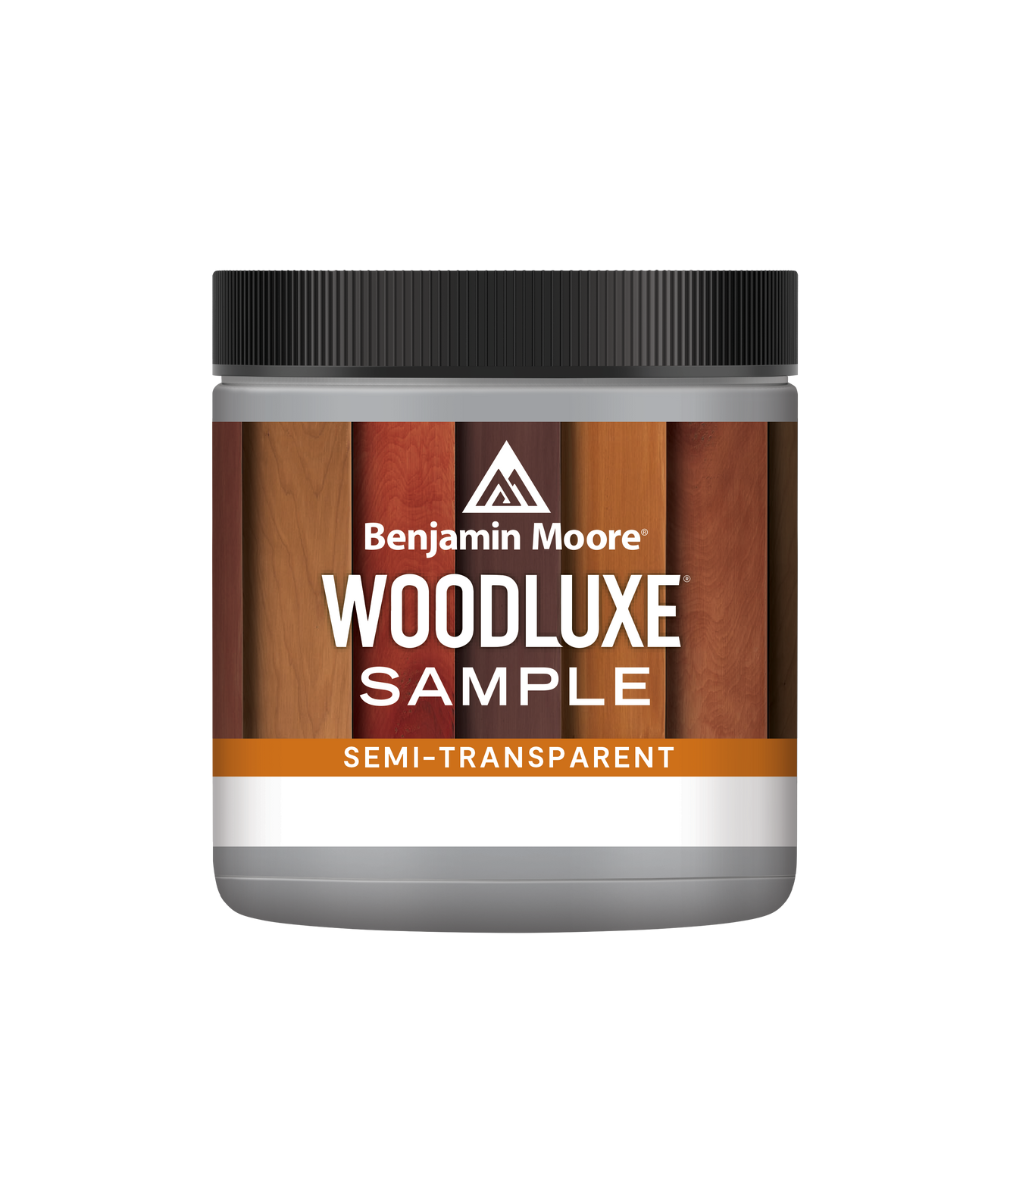 Benjamin Moore Woodluxe® Water-Based Semi-Transparent Exterior Stain Half Pint Sample available at Catalina Paints in Los Angeles County.